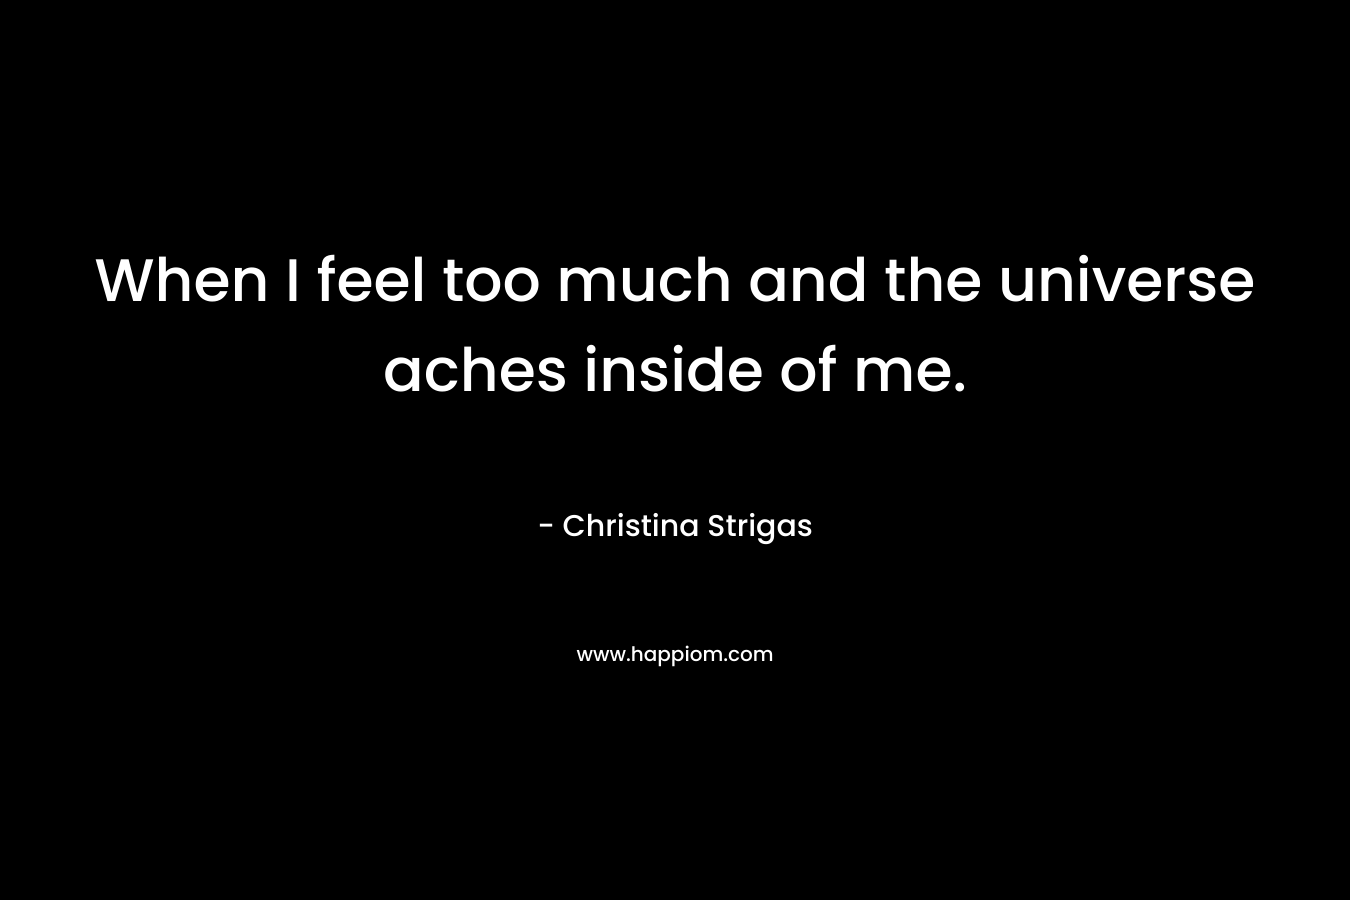 When I feel too much and the universe aches inside of me.